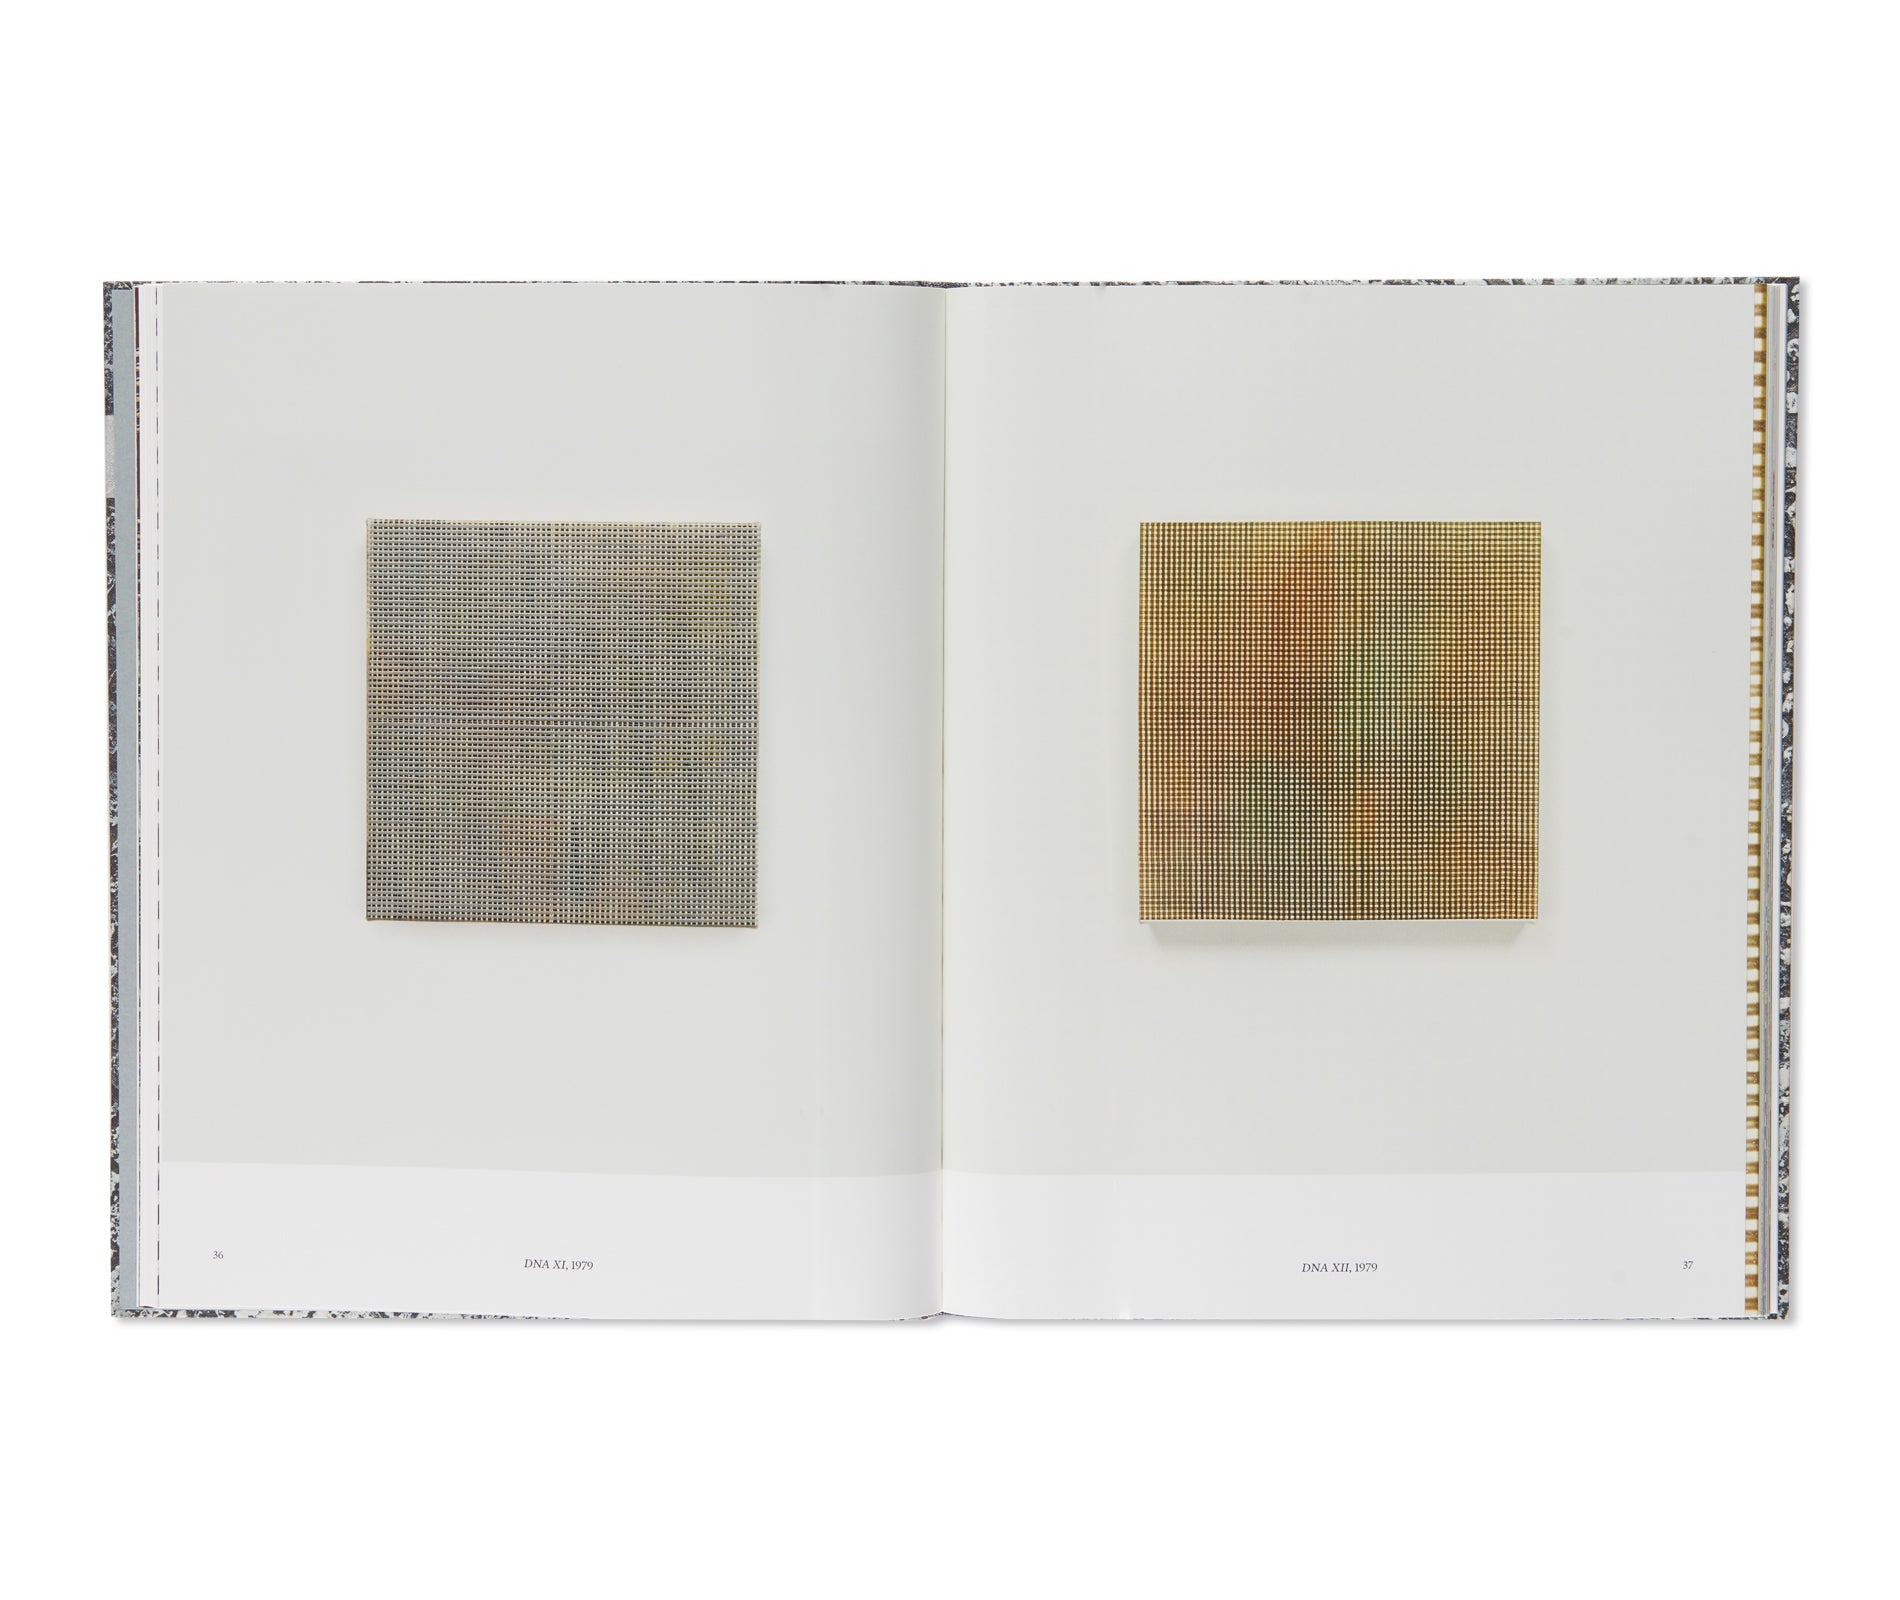 MORE DIMENSIONS THAN YOU KNOW: JACK WHITTEN, 1979–1989 by Jack Whitten